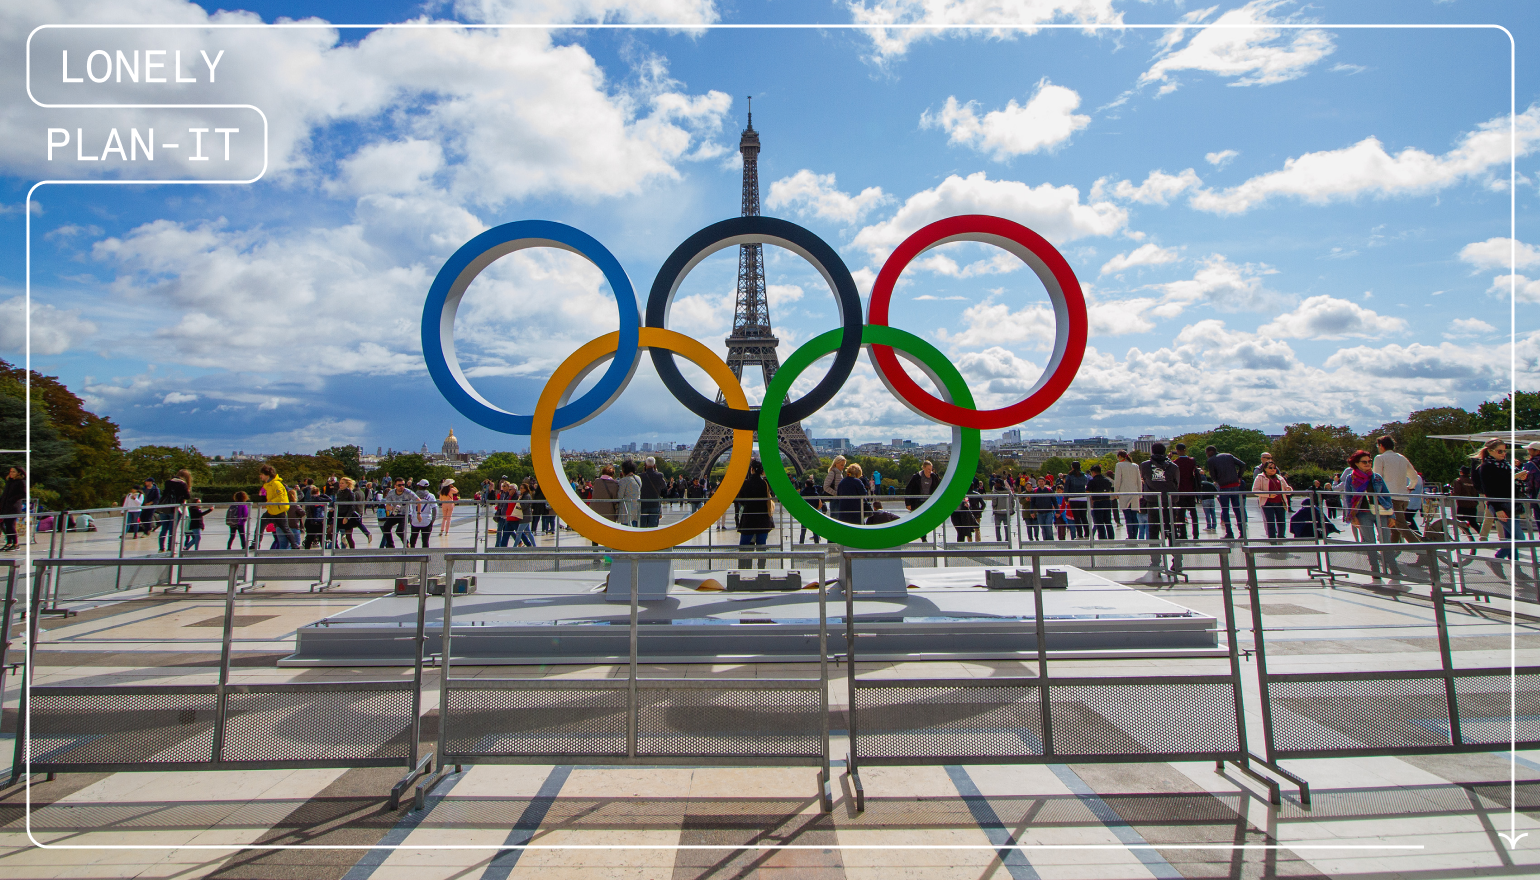 Paris 2024 presents an opening ceremony like no other